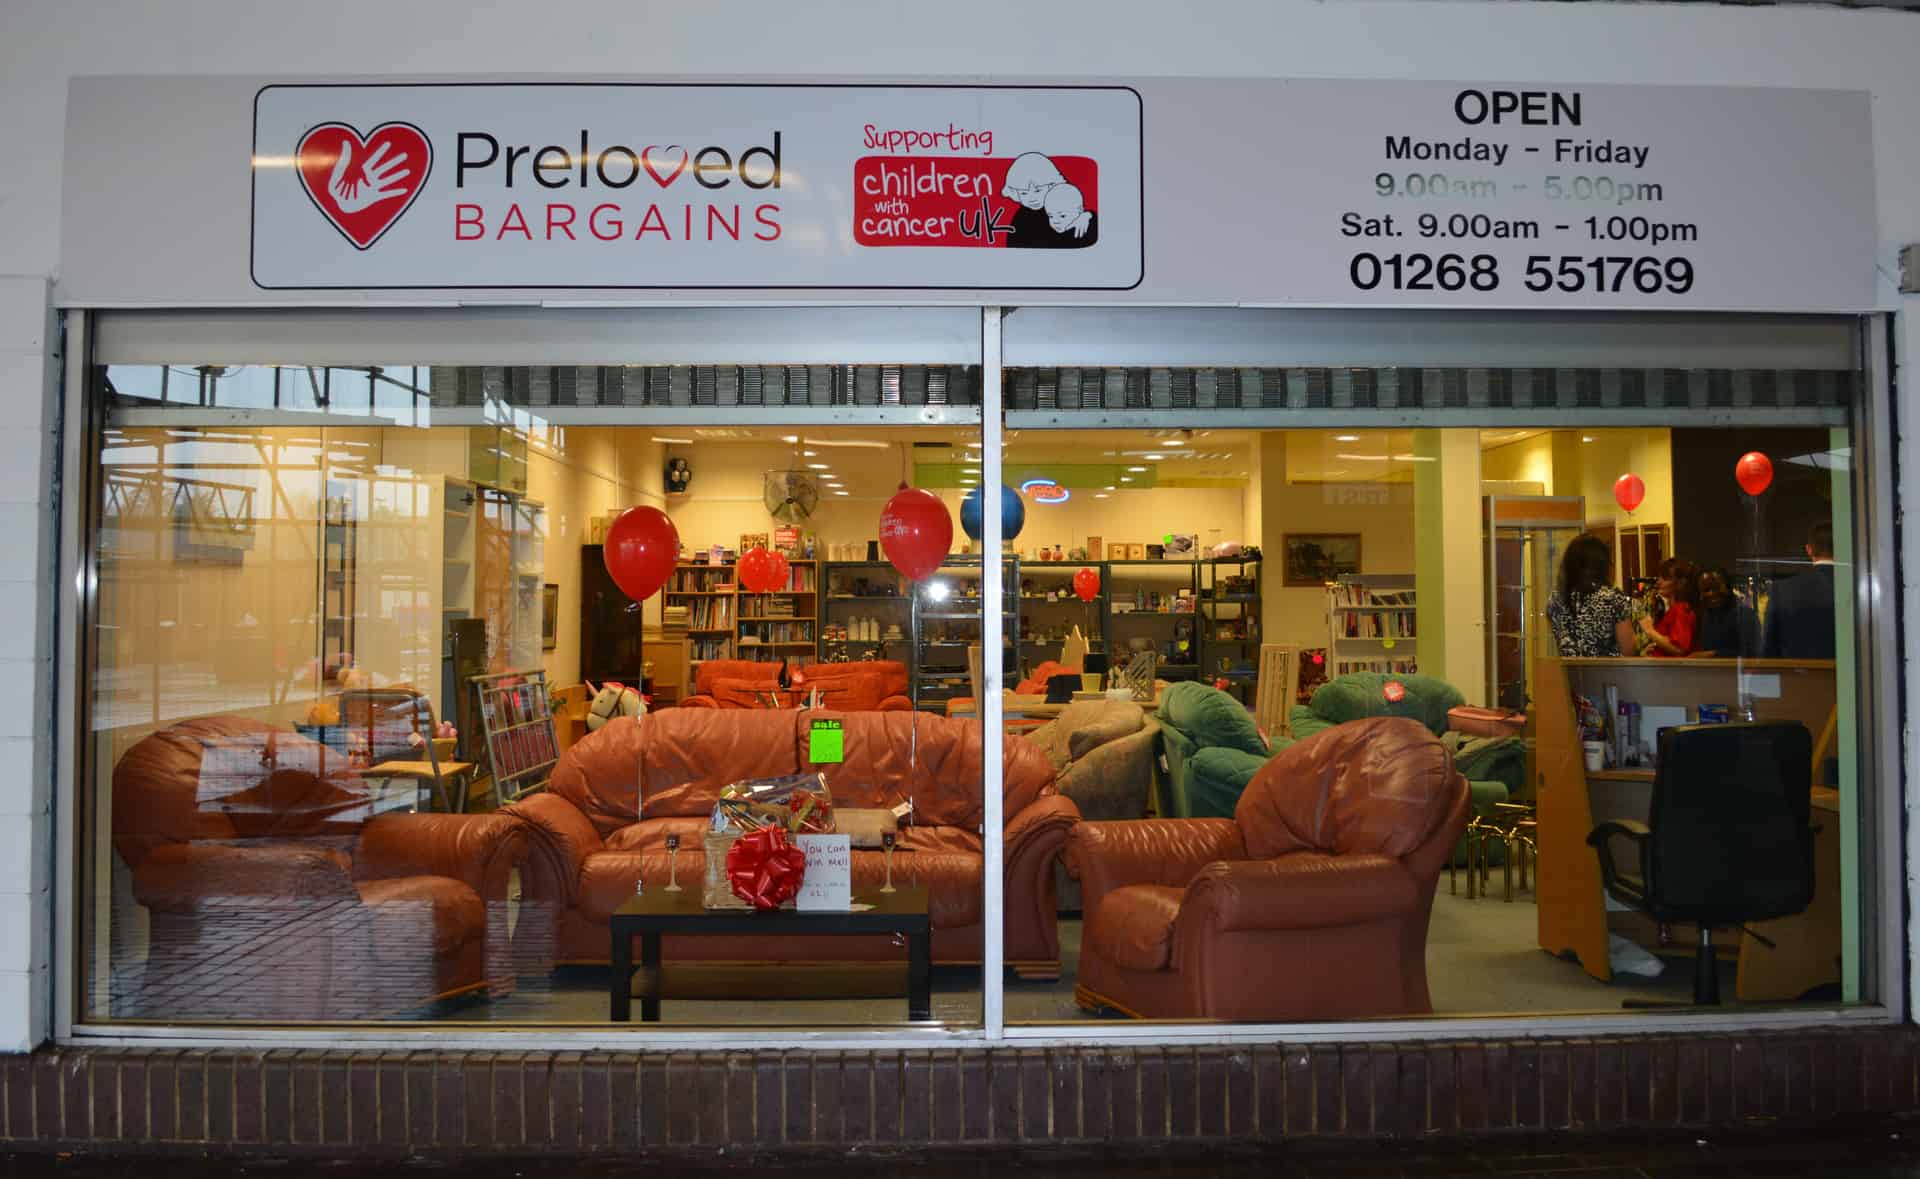 Featured image for “Preloved Bargains Opening Ceremony”